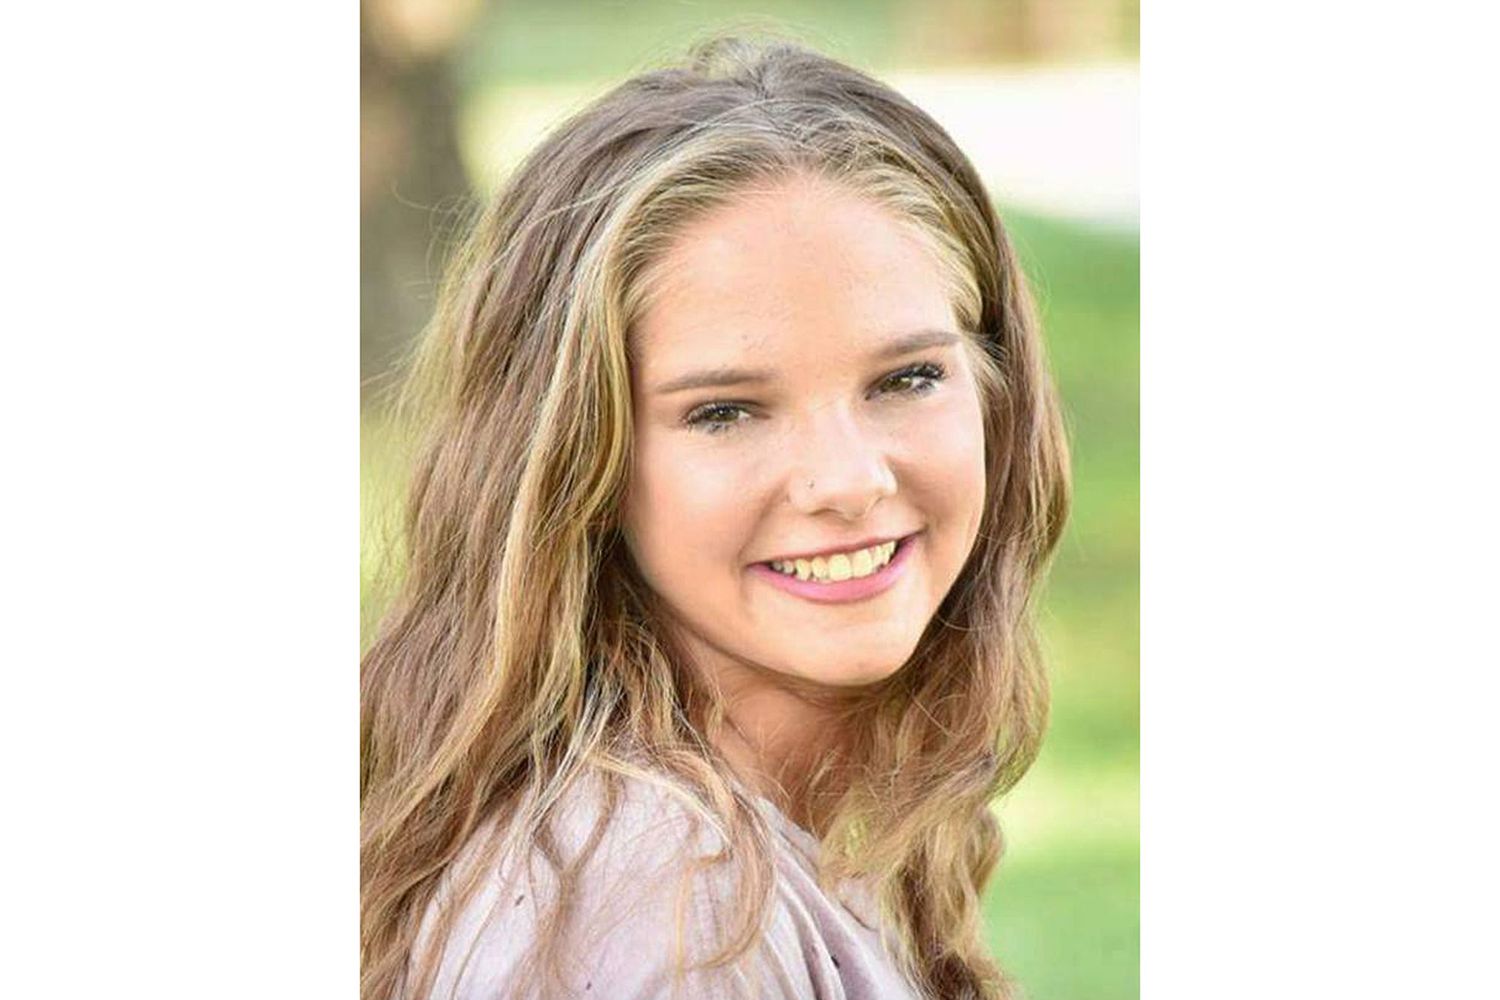 Heaven Ray Cox, the 15-year-old teenager who ran away from her Texas home i...